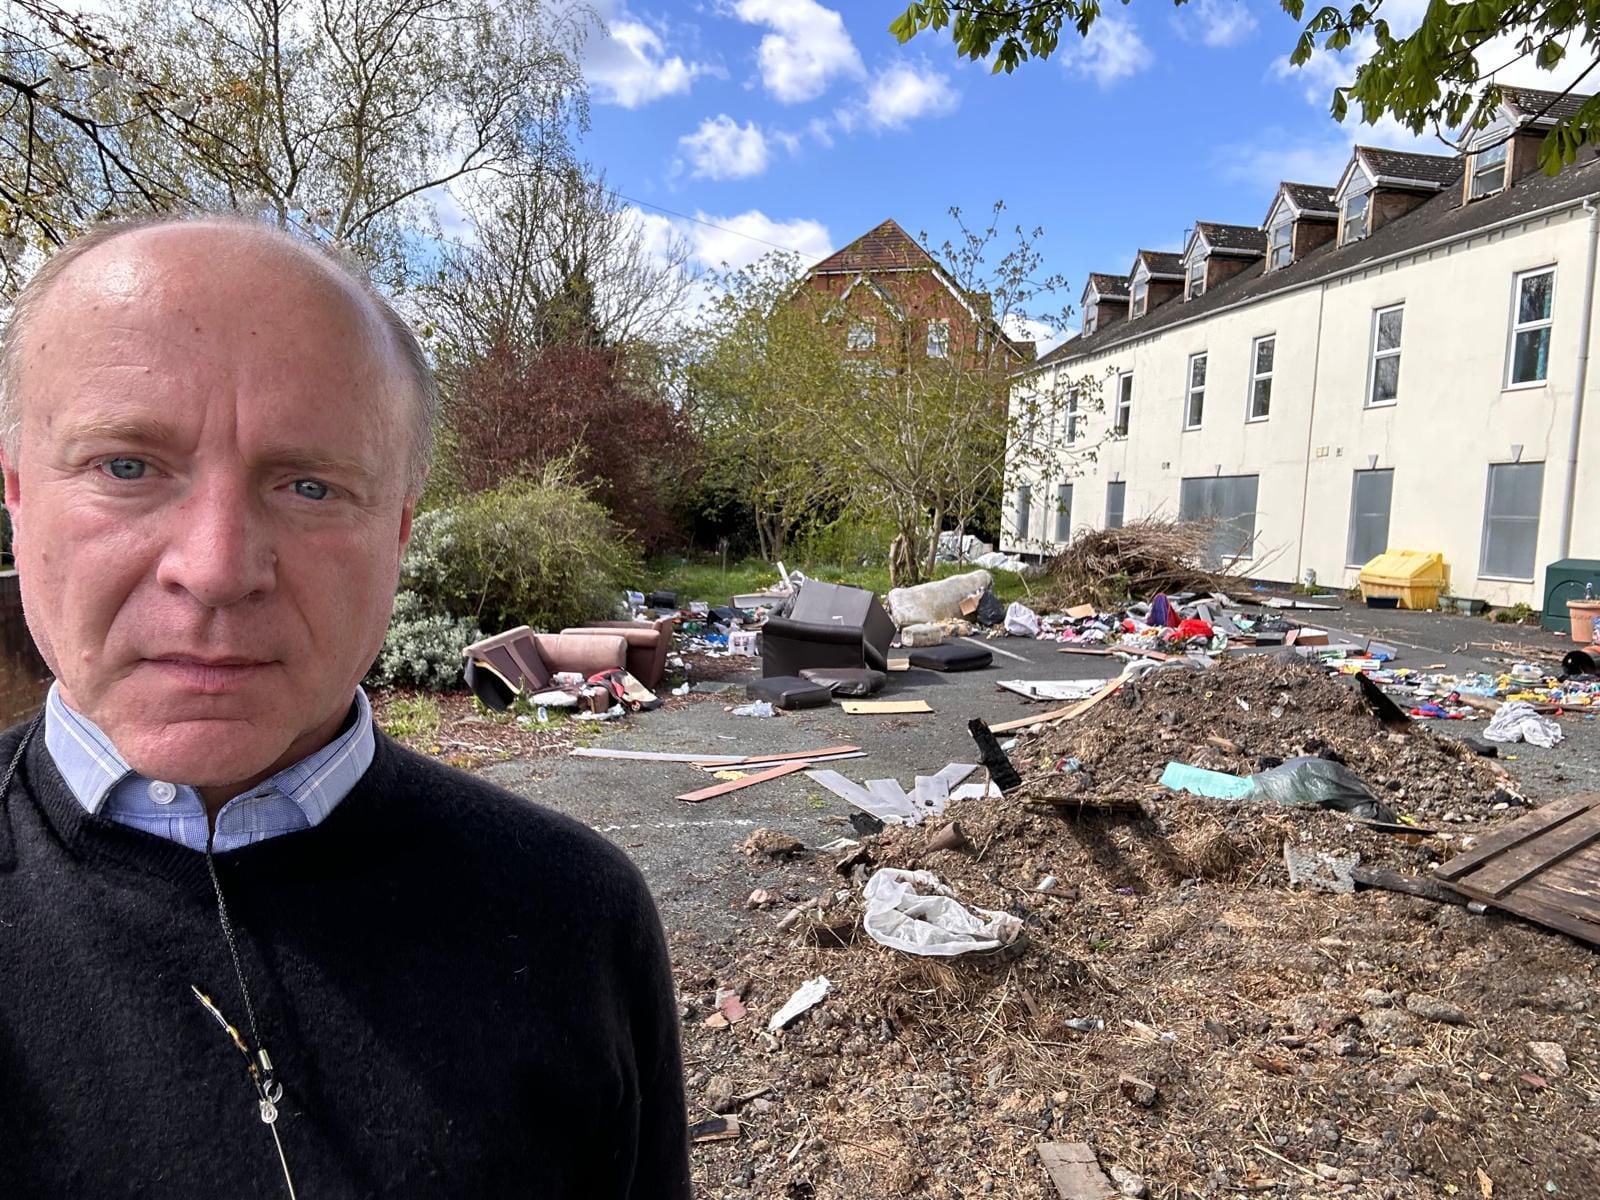 MP calls for further action at site of former Dudley care home after residents' fly-tip complaints